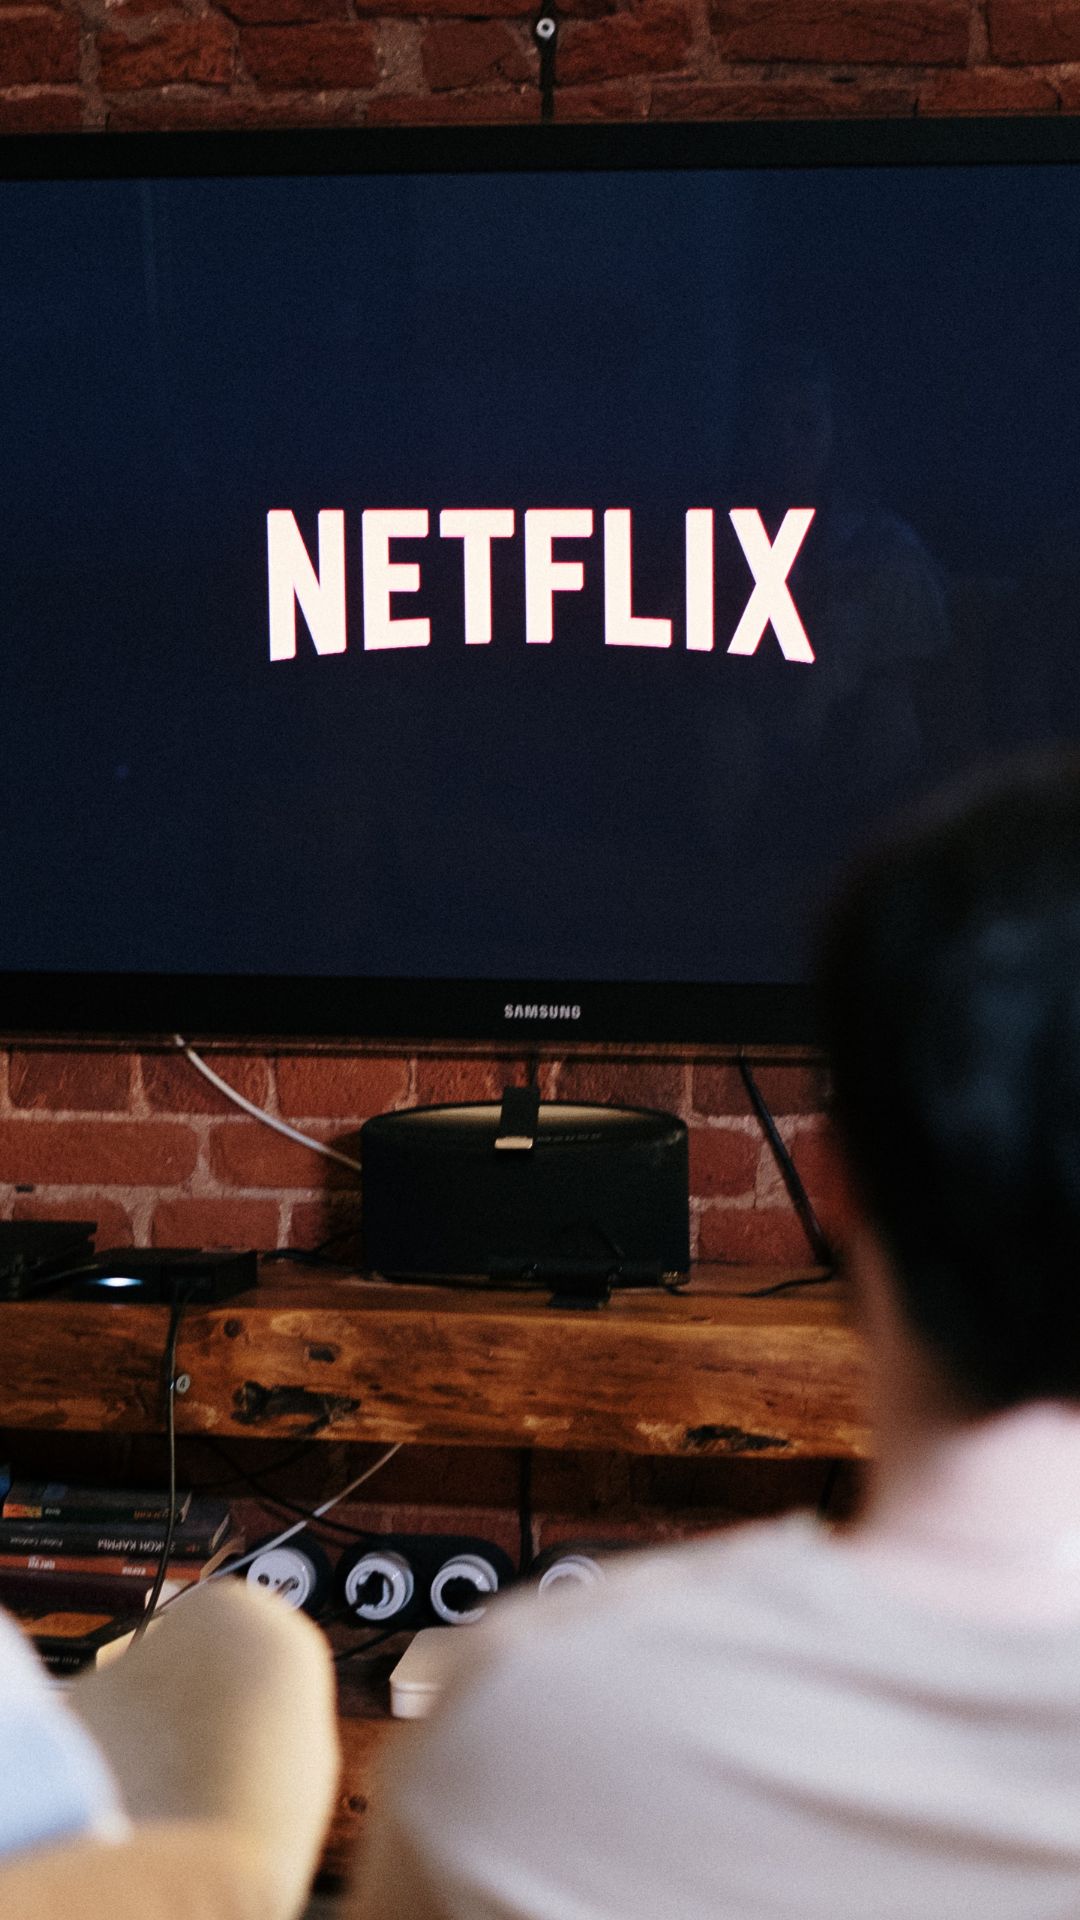 Setting up your Netflix Household? Here&rsquo;s a Step-by-step guide
